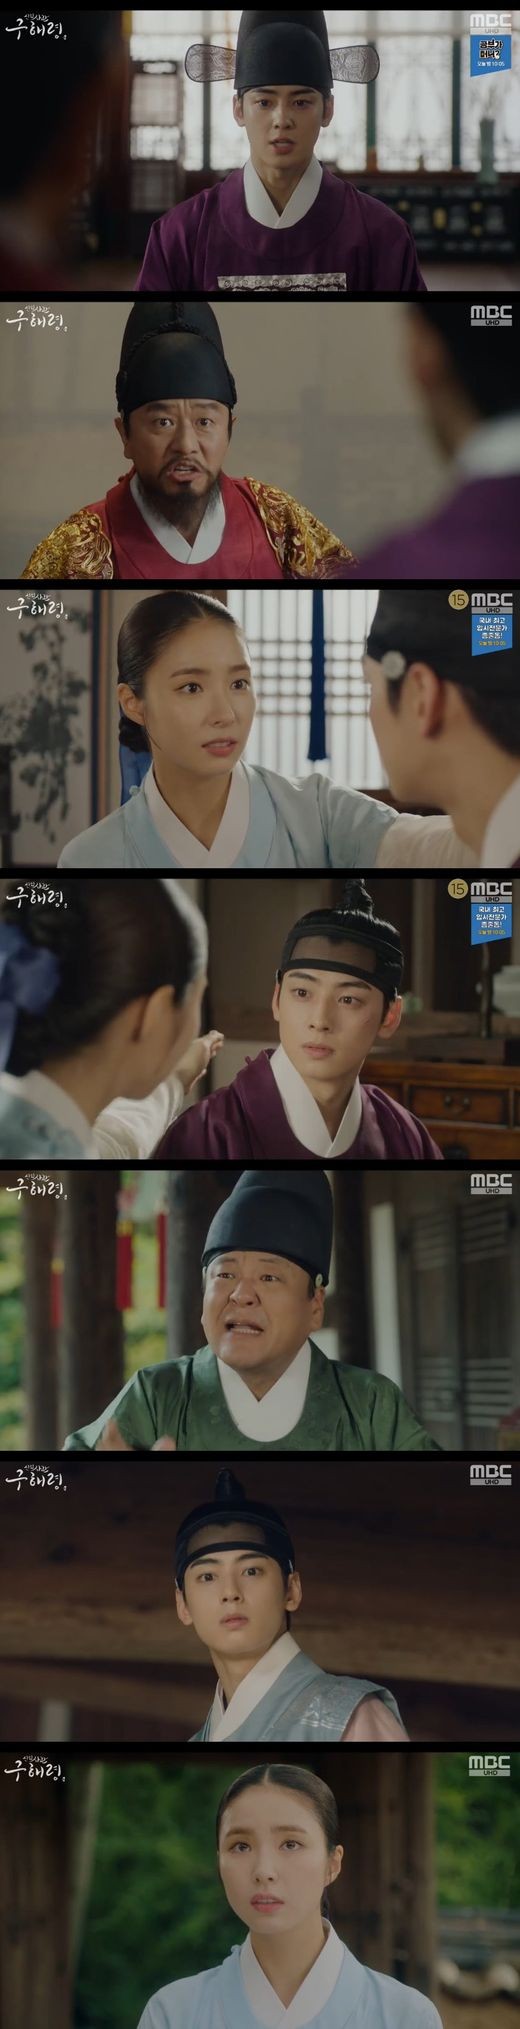 Cha Eun-woo is in Wedding Bible Danger: Who is his married man?MBCs Rookie Historian Goo Hae-ryung, which aired on the 29th, depicted Lee Rim (Cha Eun-woo), who was appalled by the installation of the Garyecheong.On this day, Lee left the wol with a letter to Lee Lim and Rookie Historian Goo Hae-ryung (Shin Se-kyung).The reason why I stepped on this strange Korean land is to meet my brother who disappeared.He said, Where my brother was, where dawn came, and if he knew the name, it would be very dangerous. So I couldnt say it.I hope you will always be lucky. Lee said, When I leave suddenly, I am suddenly, and I am a man who is at my disposal. But now I will live with two feet.Lee also expressed his curiosity about what his brother said, The place where dawn comes.The problem is that this incident led to the false accusation that the Catholic courtiers hid him. If Irim tries to reveal the truth to Itae, he says, If you close your eyes, you will pass it.Please pretend you didnt see it.This is not simple, said Hussambo, and he let me run away, not even hiding the band sinner.I do not know what punishment I will receive. But Irim showed his will to live in the melted party no longer.In the end, Irim found Itae and said, Please stop the execution of the Catholic courtmen. I am the one who is looking for in the Ministry of Finance.Lee said, Now that I want to be a person, I came close to it, and how do you think that Sejo of Joseon of this country will eat with a Western oranger?Irim explained that he regarded them as people who were not orangers, but Lee said, You are also wrong from birth.No matter how much you live in Sejo of Joseon clothes, you can not help being born. Lee Tae ordered the punishment of the Catholic courtmen, but Lee Jin (Park Ki-woong) released them.Lee Tae only stepped back from the dismantling of Lim (Kim Yeo-jin).Irim was encouraged for the Catholic courtmen and Rookie Historian Goo Hae-ryung.Rookie Historian Goo Hae-ryung encouraged him by petting the Irim, who fulfilled the responsibility of Sejo of Joseon; thus, Irim felt a throbbing.On this day, Lee Tae called for the installation of the Garyecheong and raised a blue voice.Irim was surprised to hear, Me? Sejo of Joseon? He said, Yes, the Lord orders Mama to marry.The royal Wedding Bible is an extension of politics, not a sergeant; the relationship between Irim and Rookie Historian Goo Hae-ryung again met Danger.